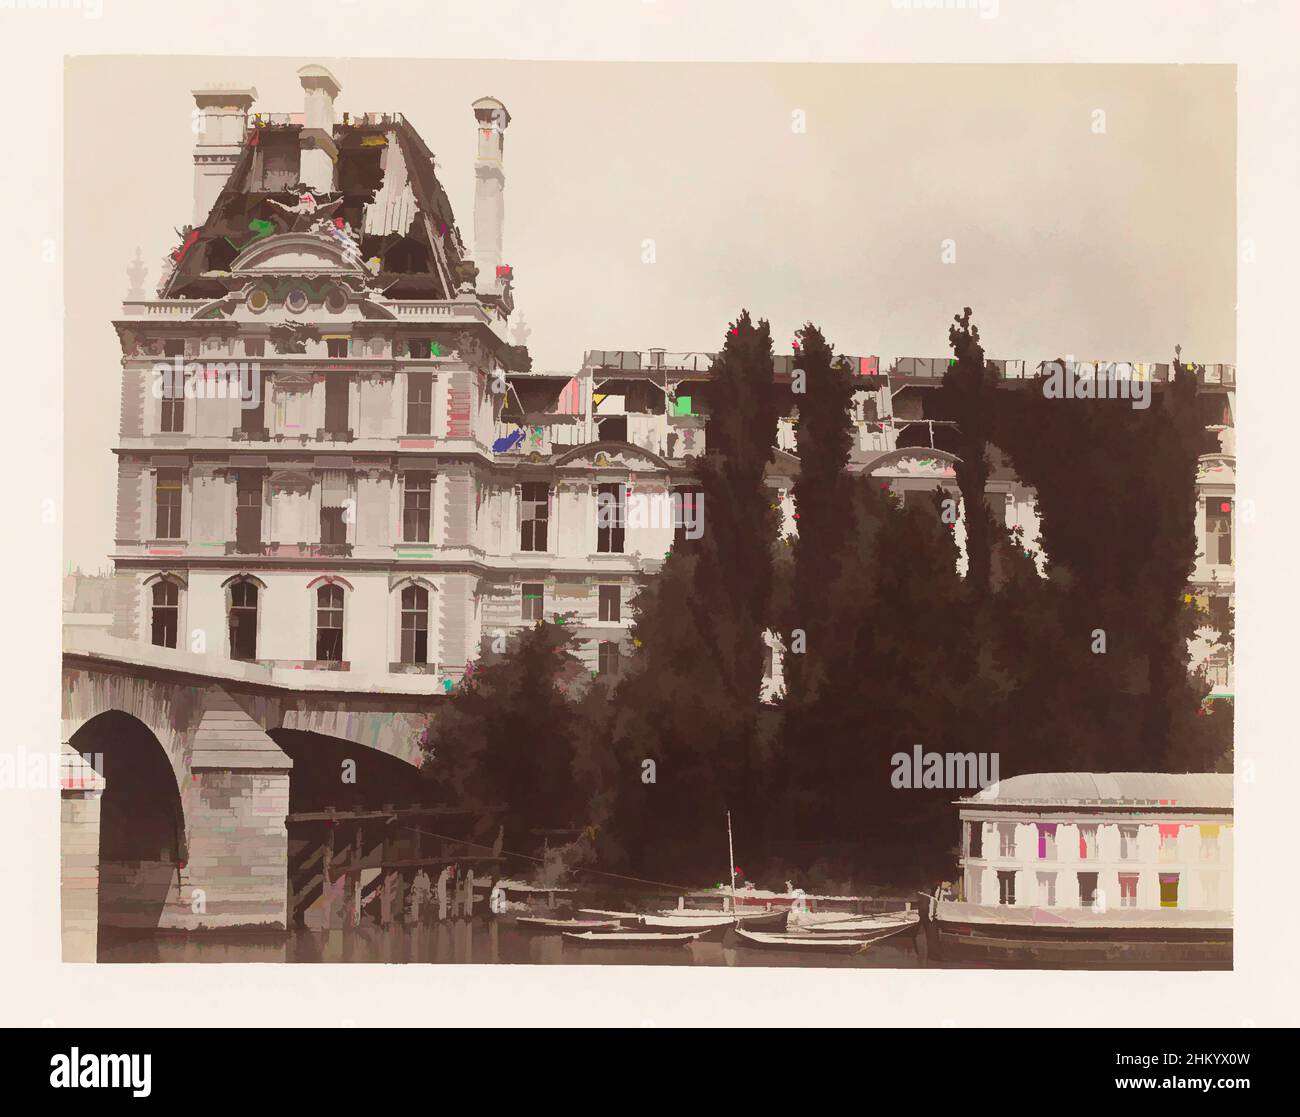 Art inspired by Destruction at the Louvre, Pavillon de Flore at the time of the Commune, with the Seine in the foreground, Charles Soulier, France, 1871, cardboard, albumen print, height 369 mm × width 510 mmheight 196 mm × width 252 mm, Classic works modernized by Artotop with a splash of modernity. Shapes, color and value, eye-catching visual impact on art. Emotions through freedom of artworks in a contemporary way. A timeless message pursuing a wildly creative new direction. Artists turning to the digital medium and creating the Artotop NFT Stock Photo